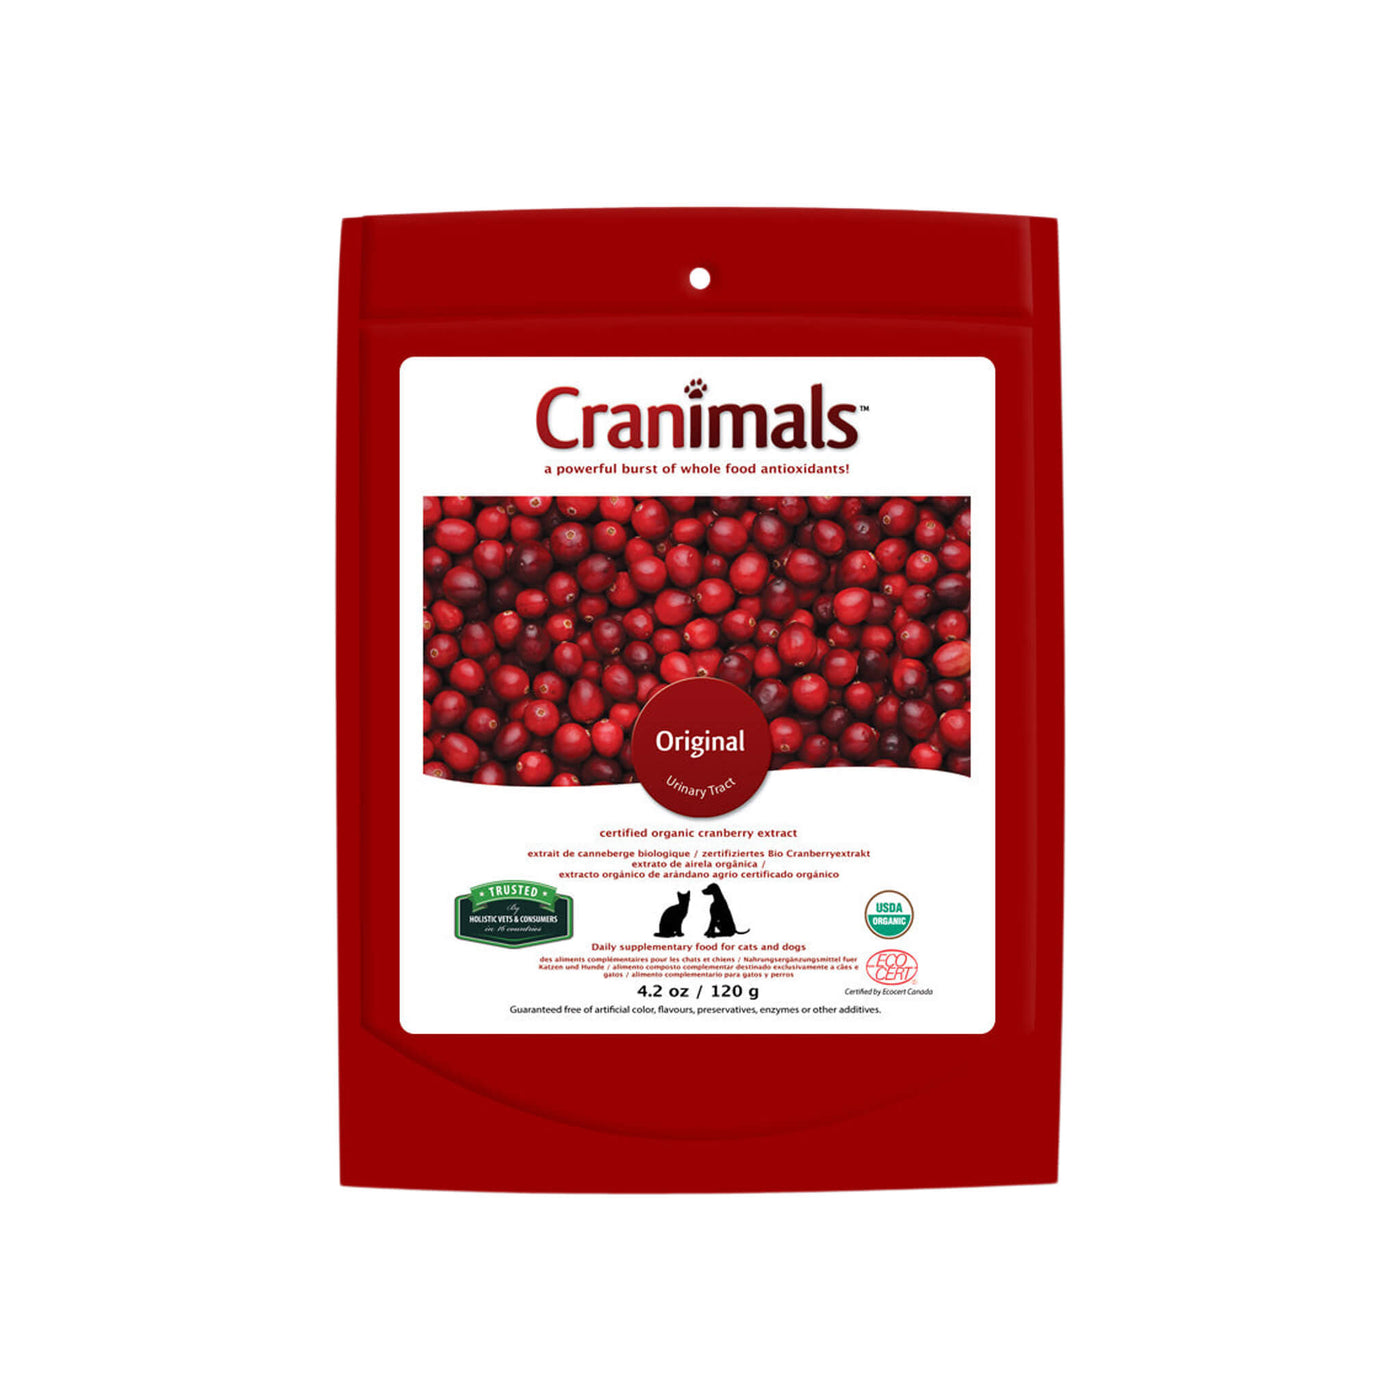 are cranberry capsules safe for dogs